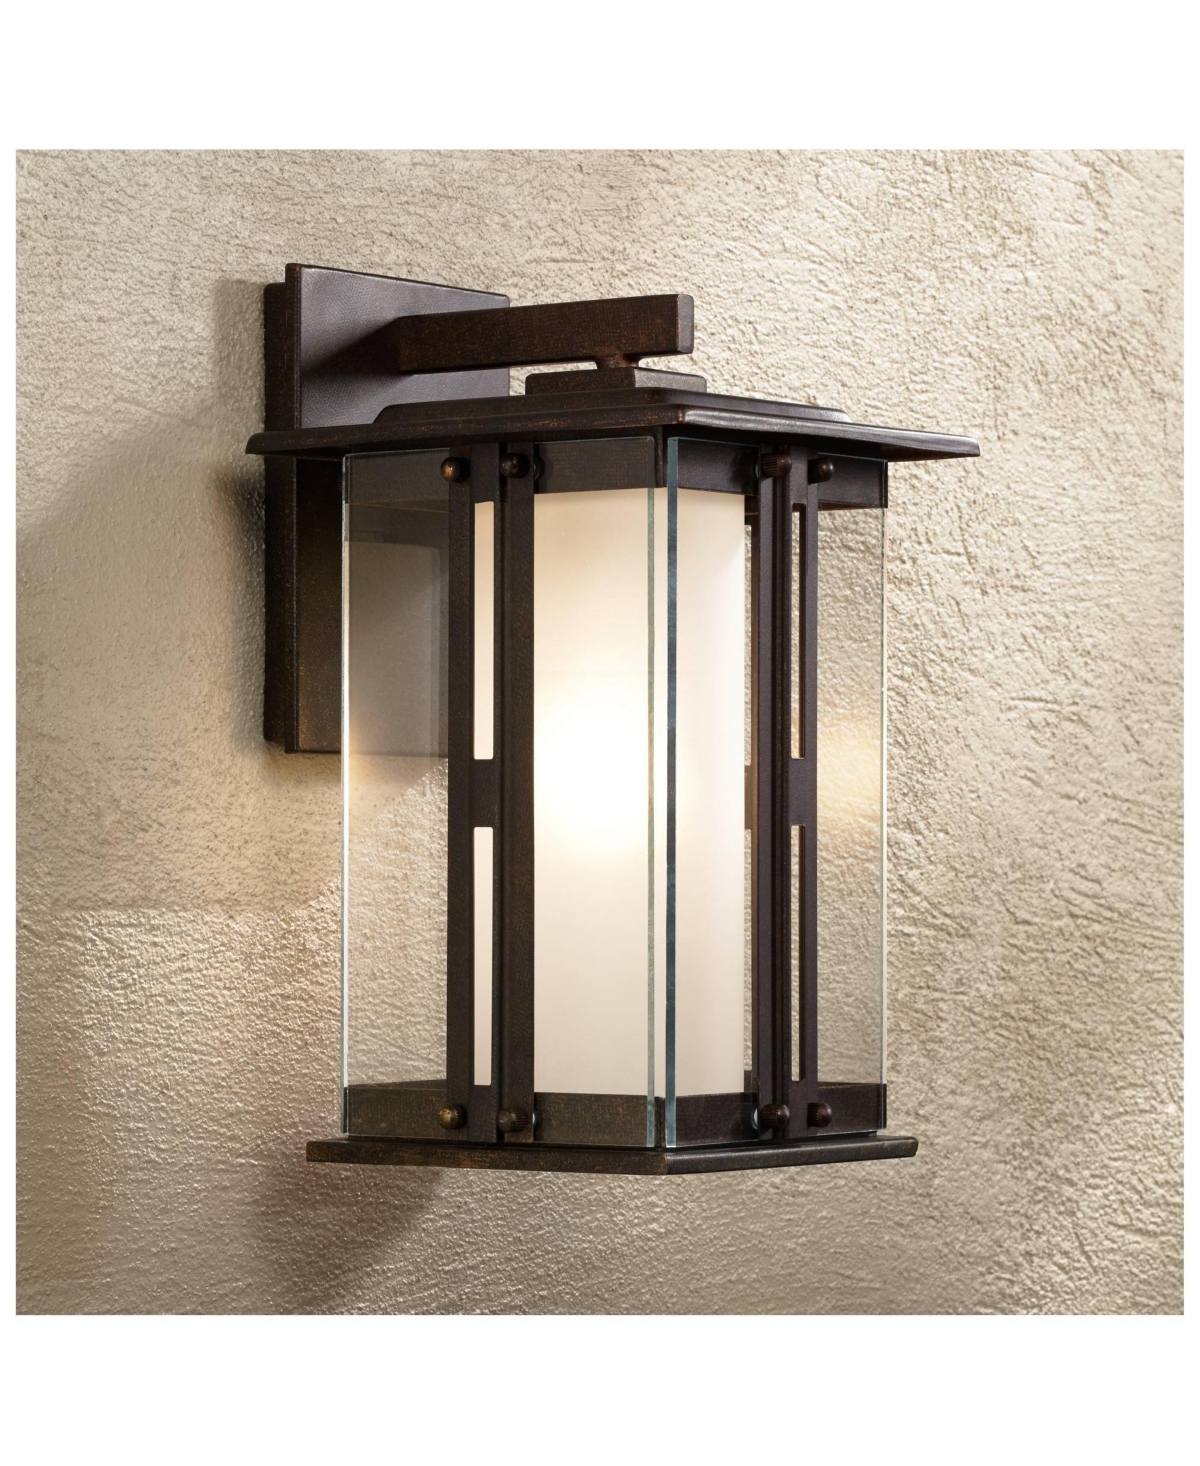 Fallbrook Rustic Farmhouse Outdoor Wall Light Fixture Bronze Steel 11 3/4" Clear Frosted Double Glass for Exterior House Porch Patio Outside Deck Gara